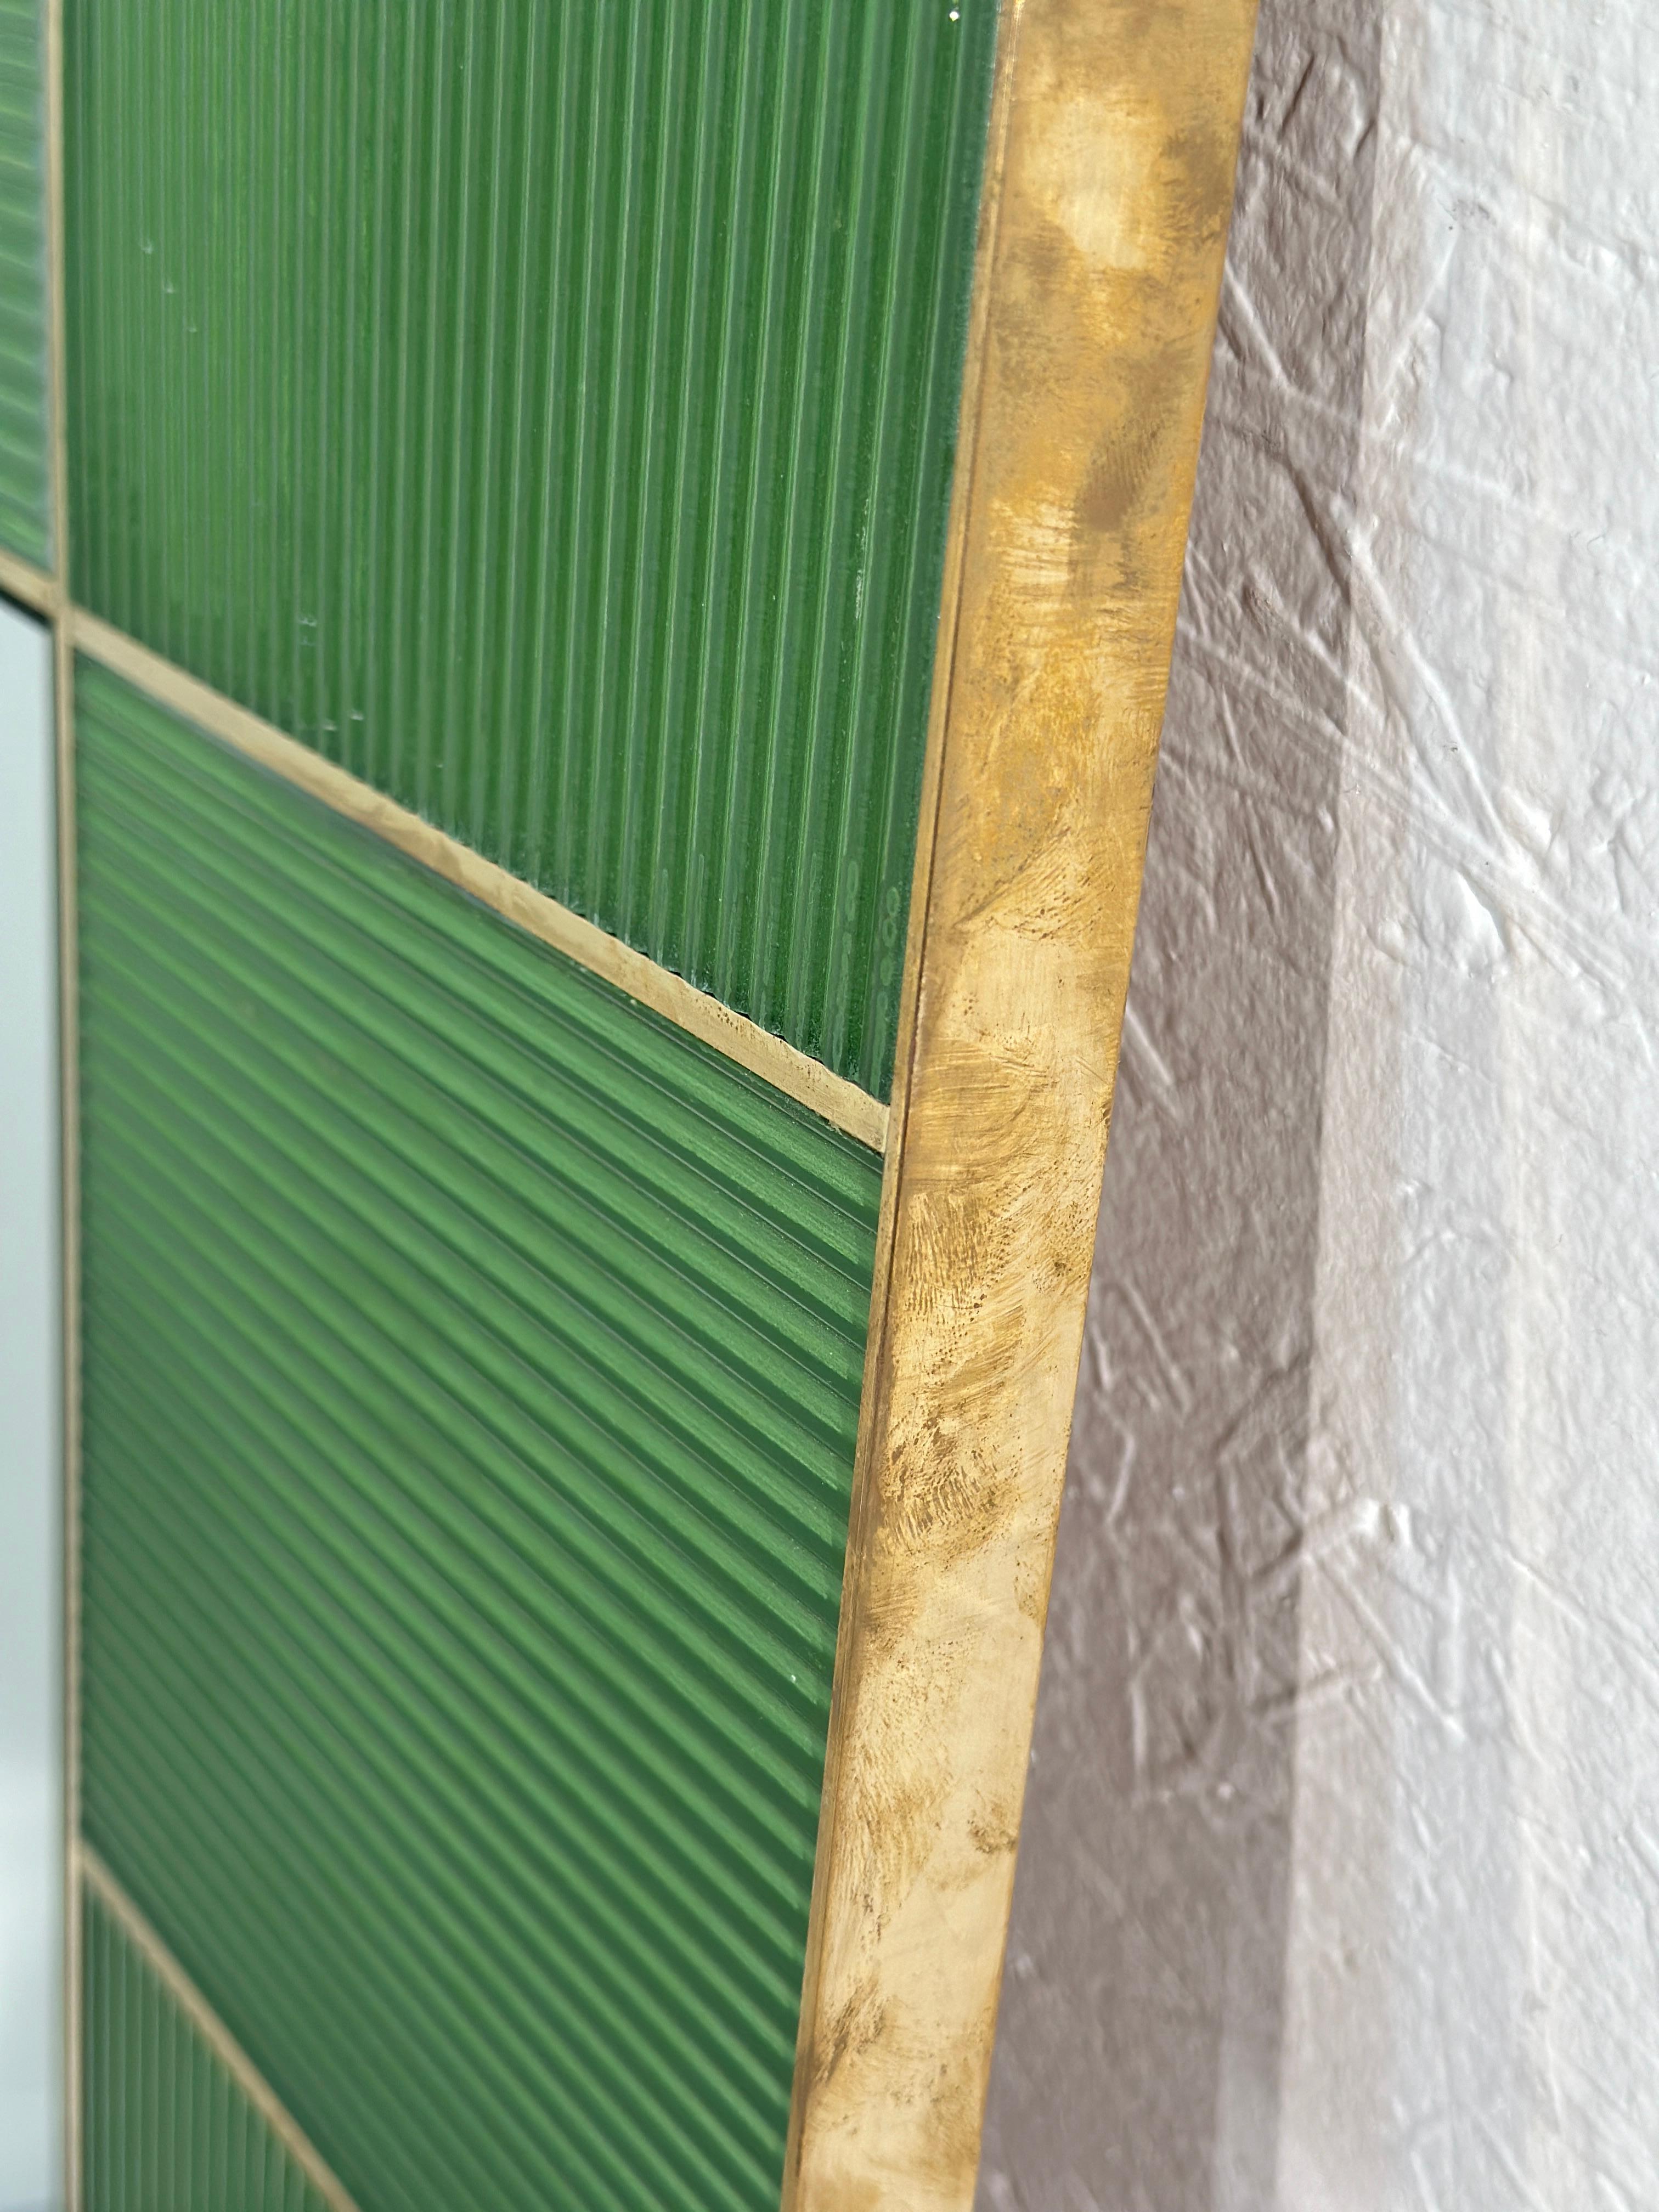 The Vintage Italian Rectangular Wall Mirror from the 1980s features a charming green frame accented with brass details. Its sleek design reflects the iconic style of the era, adding a touch of retro elegance to any space.

